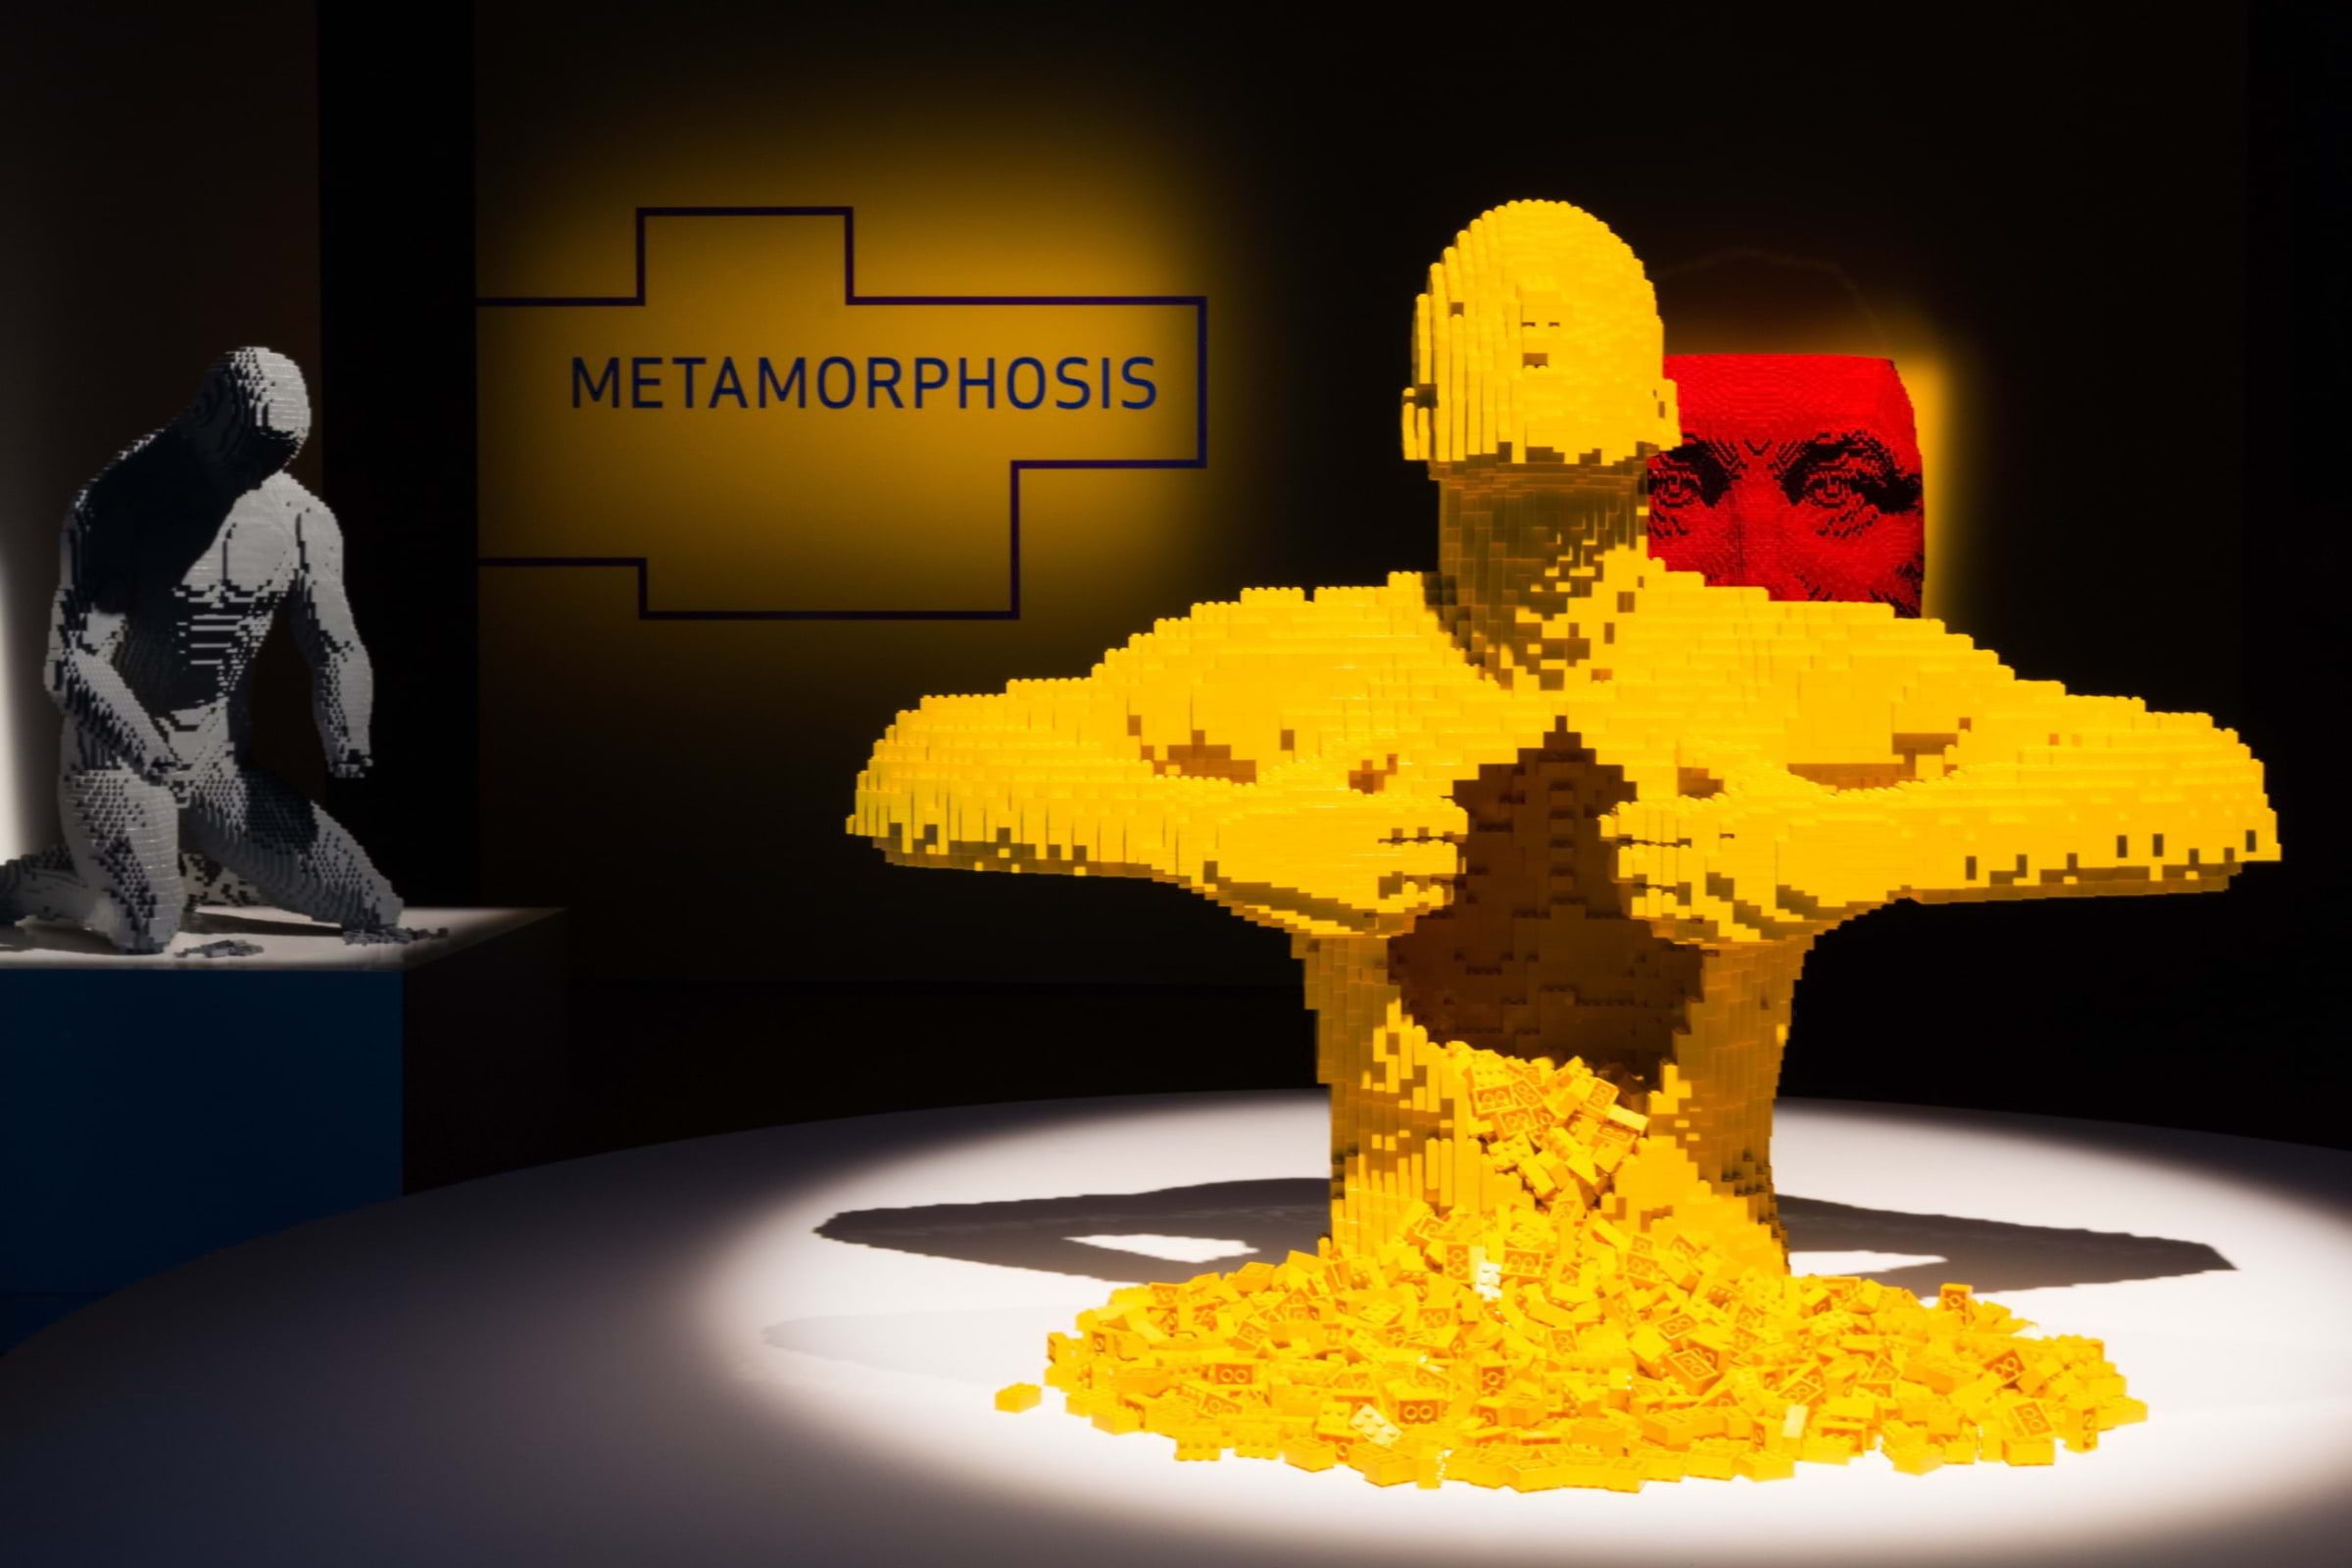 The best-known Lego art exhibition in the world comes to London in March